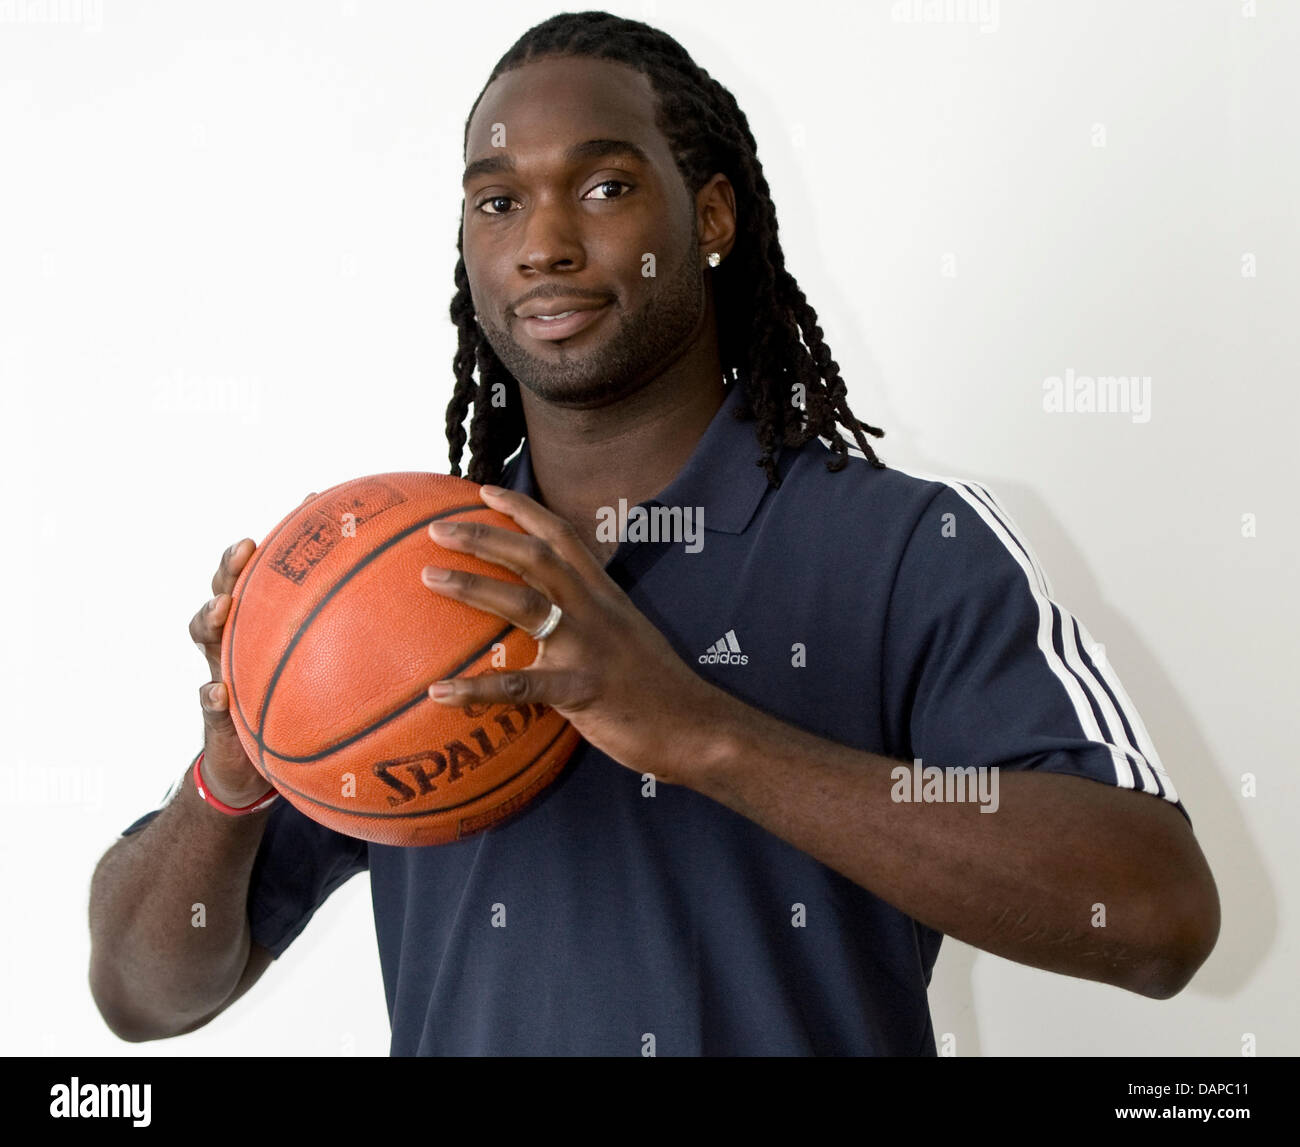 US basketball player Torin Francis poses with a basketball in Berlin, Germany, 10 August 2011. Torin and Simonovic are new players of Alba Berlin and will present their skills in the coming season in Berlin. Photo: Britta Pedersen Stock Photo